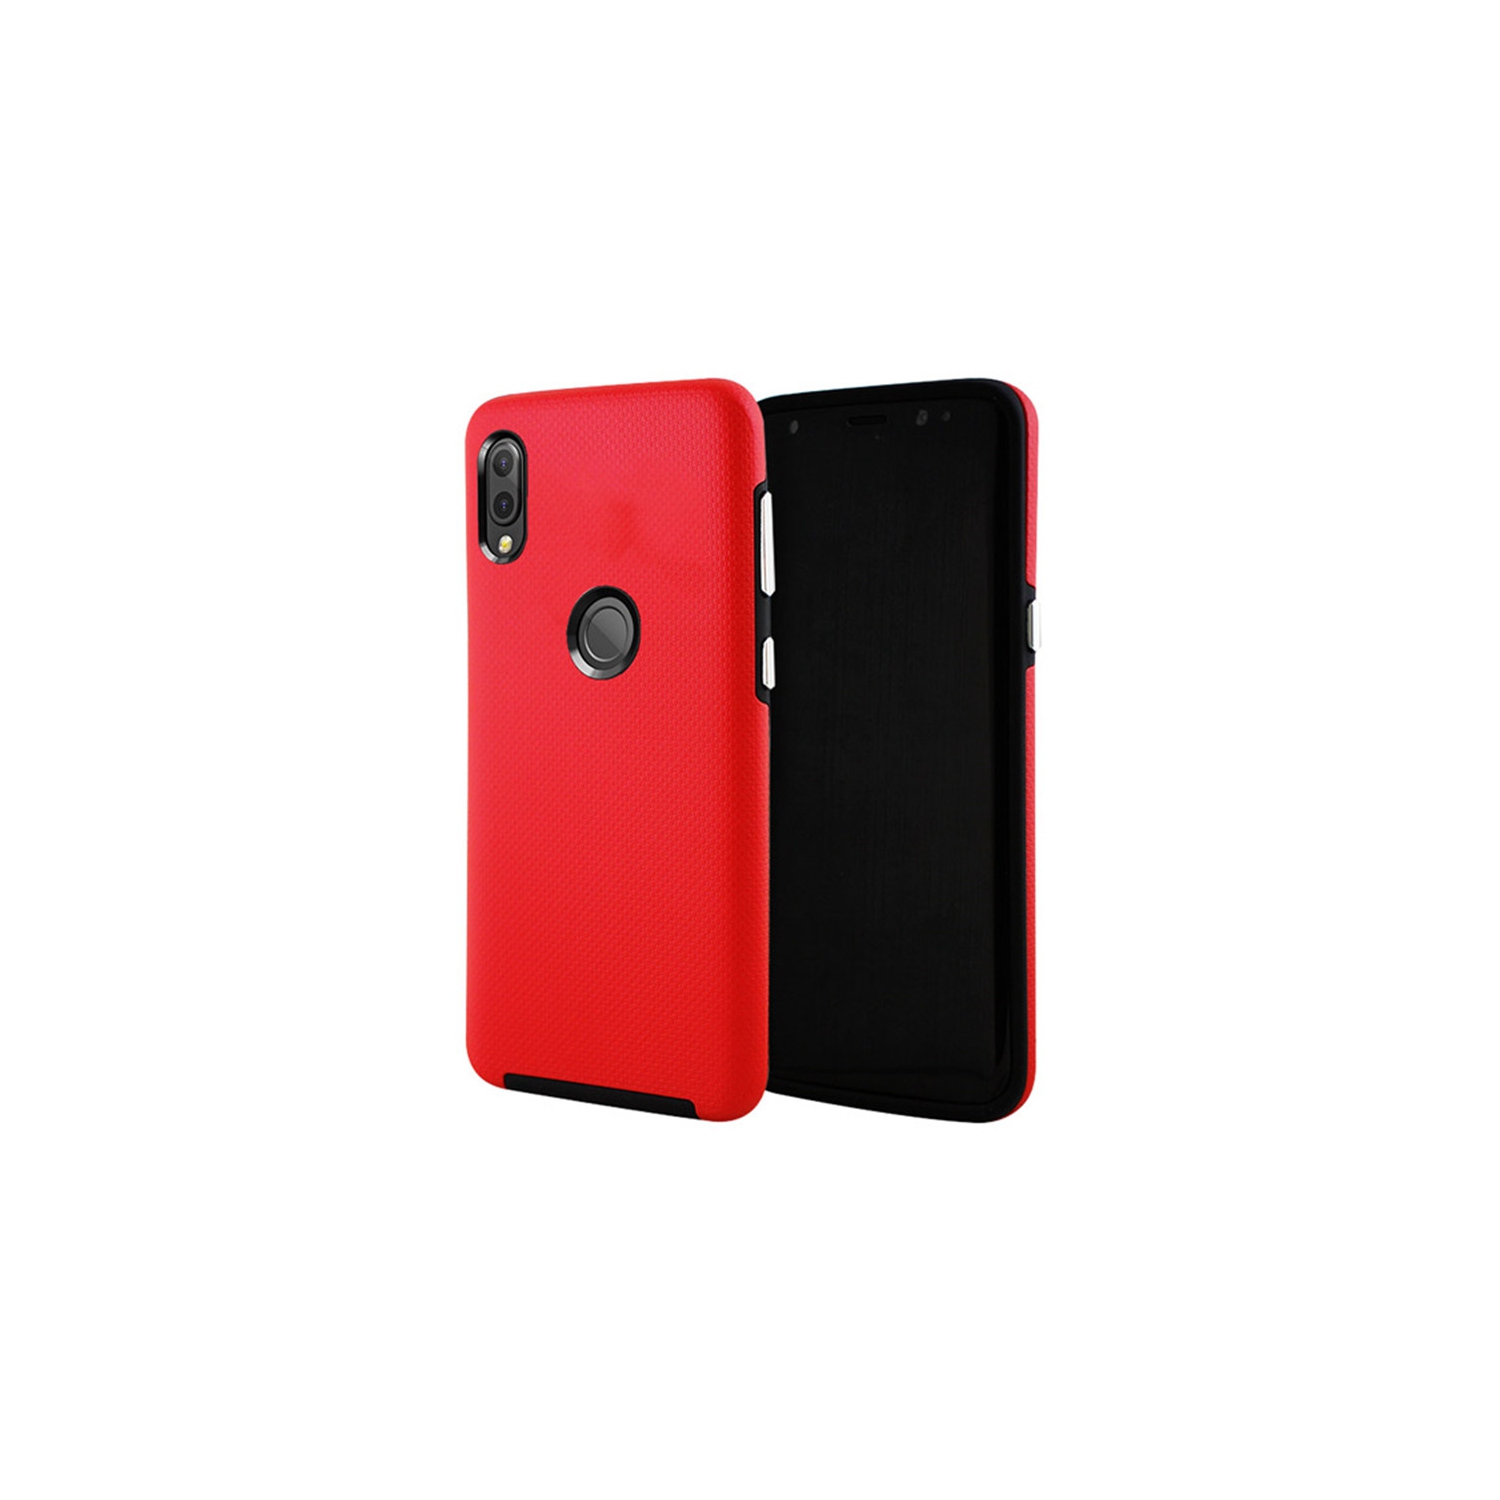 【CSmart】 Slim Fitted Hybrid Hard PC Shell Shockproof Scratch Resistant Case Cover for Huawei P20 Lite, Red